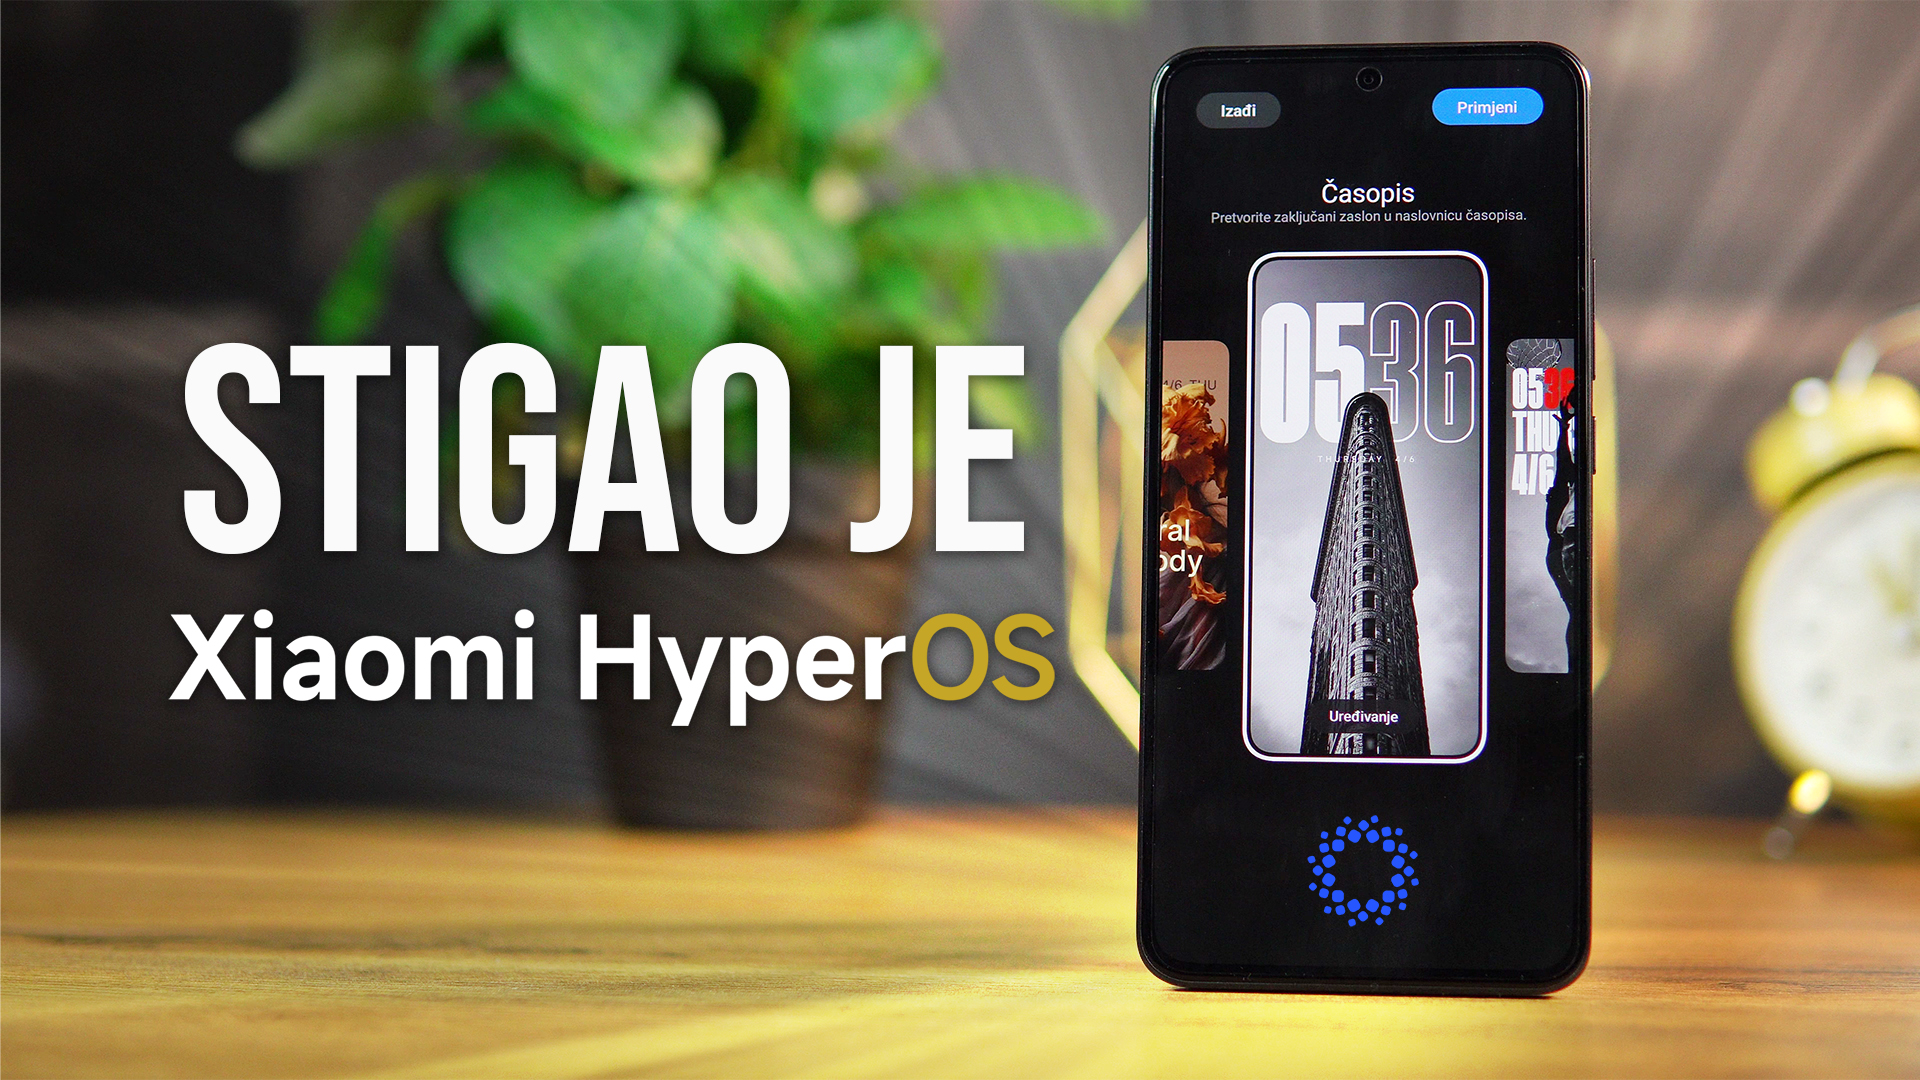 We Tested the New Xiaomi System – HyperOS (VIDEO)